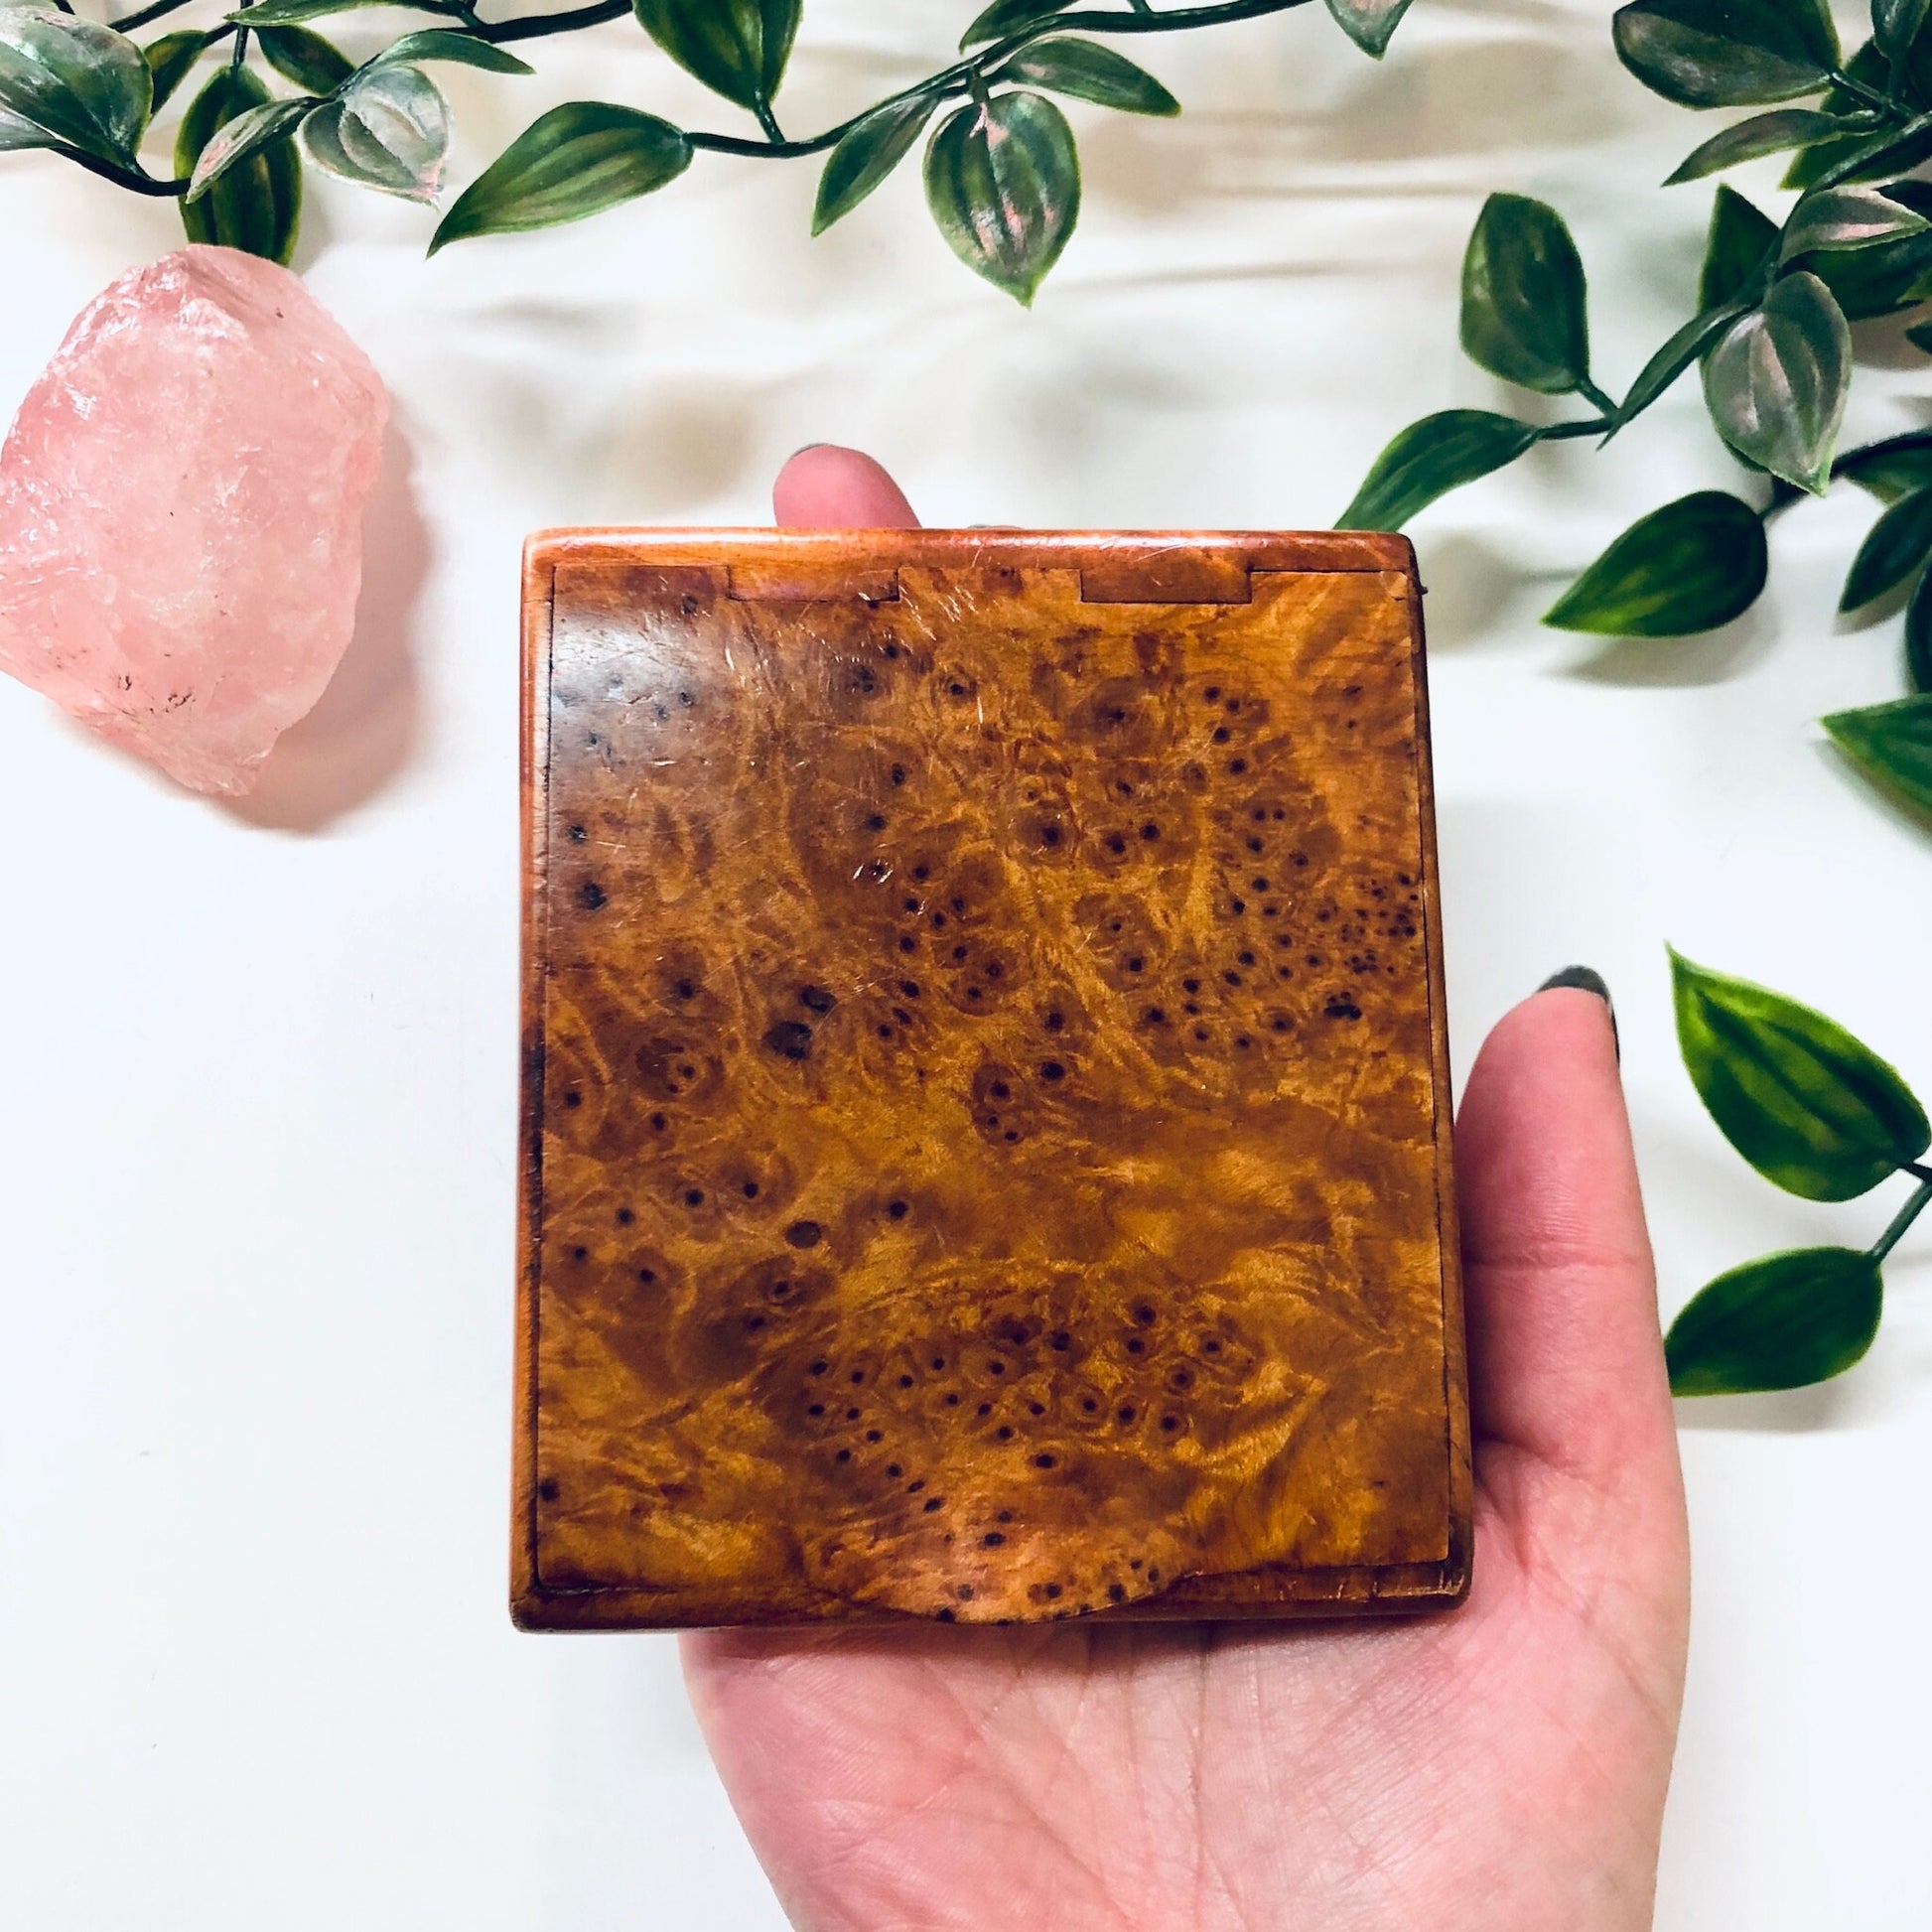 Vintage wooden hinged box with burl wood pattern held in hand with leaves in background, can be used as cigarette case or business card holder